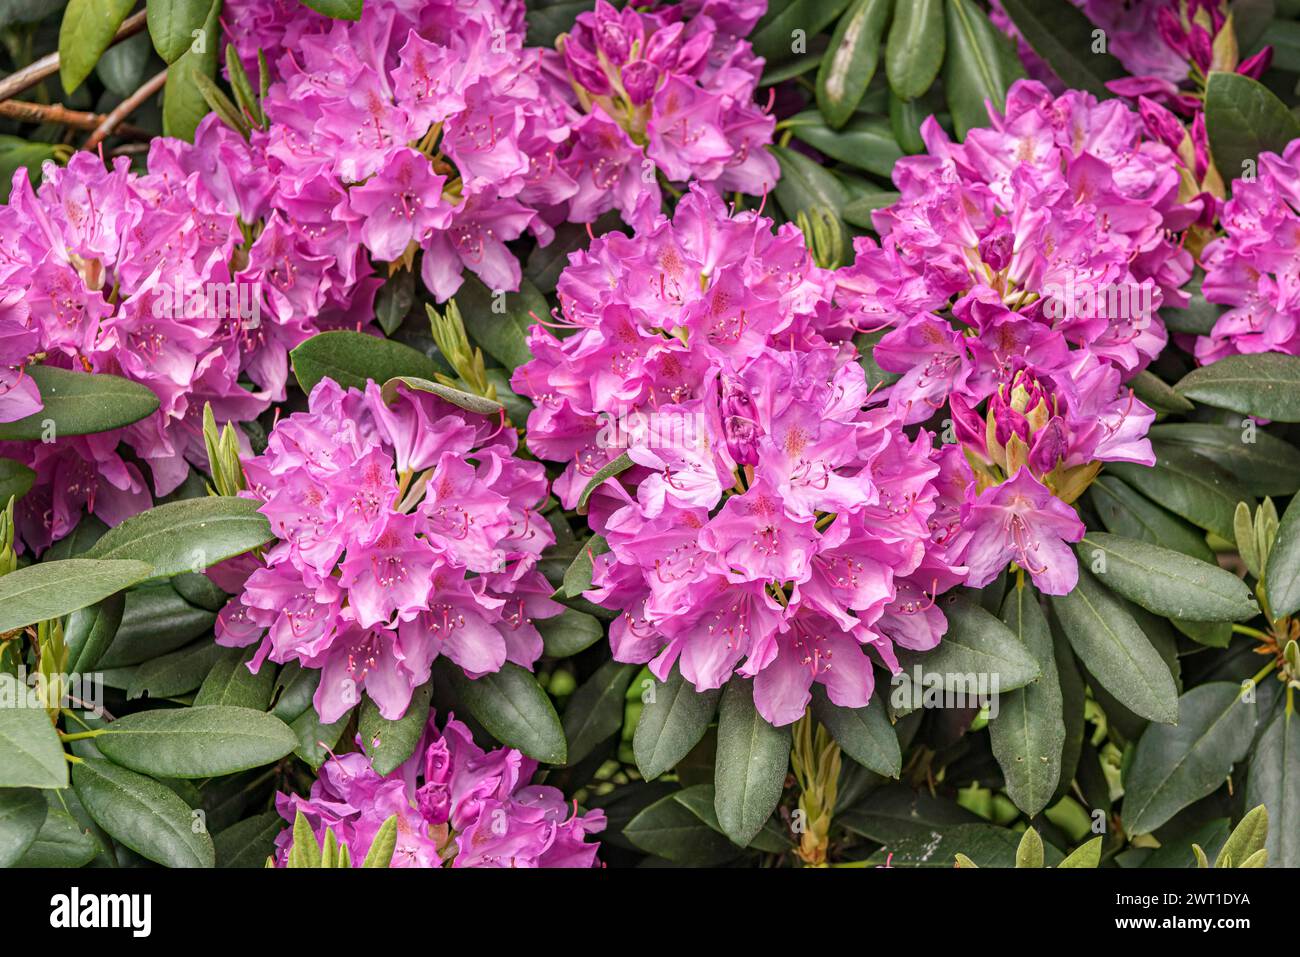 rhododendron (Rhododendron 'Roseum Elegans', Rhododendron Roseum Elegans), blooming, cultivar Roseum Elegans Stock Photo